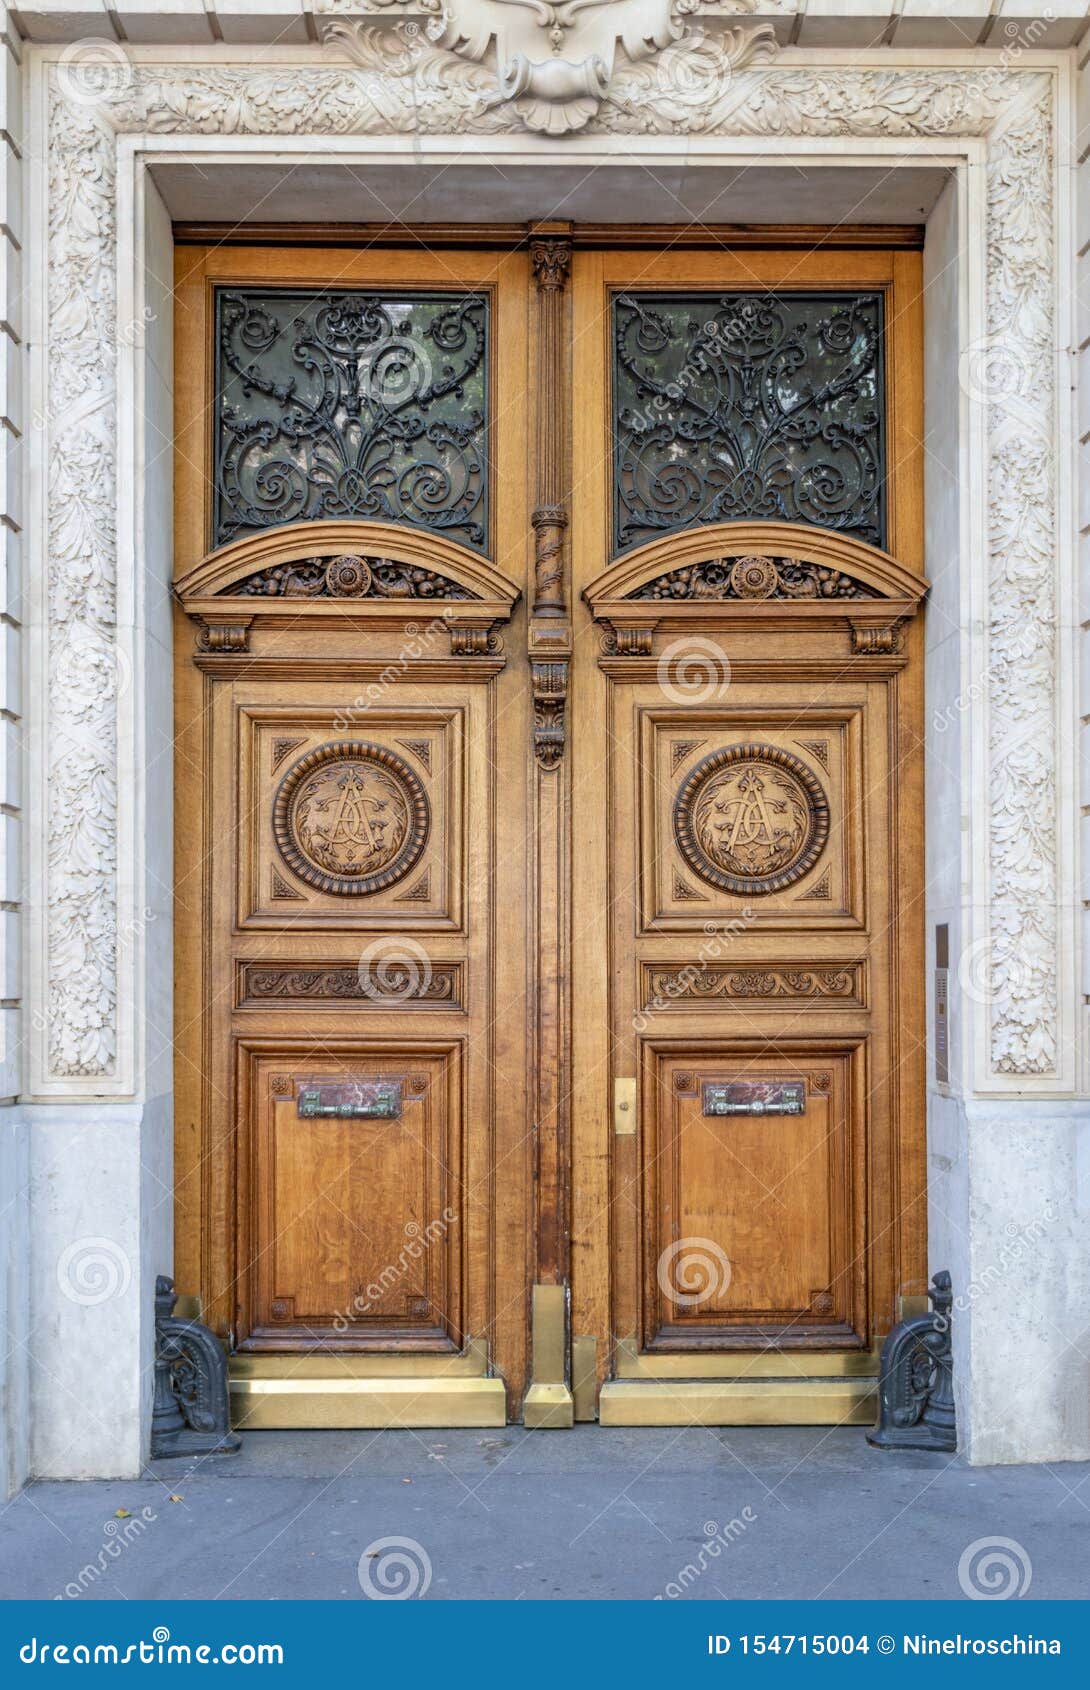 Antique Double Door Entrance of Old Building in Paris France. Vintage  Wooden Doorway and Stucco Fretwork Wall. Stock Photo - Image of carving,  double: 154715004